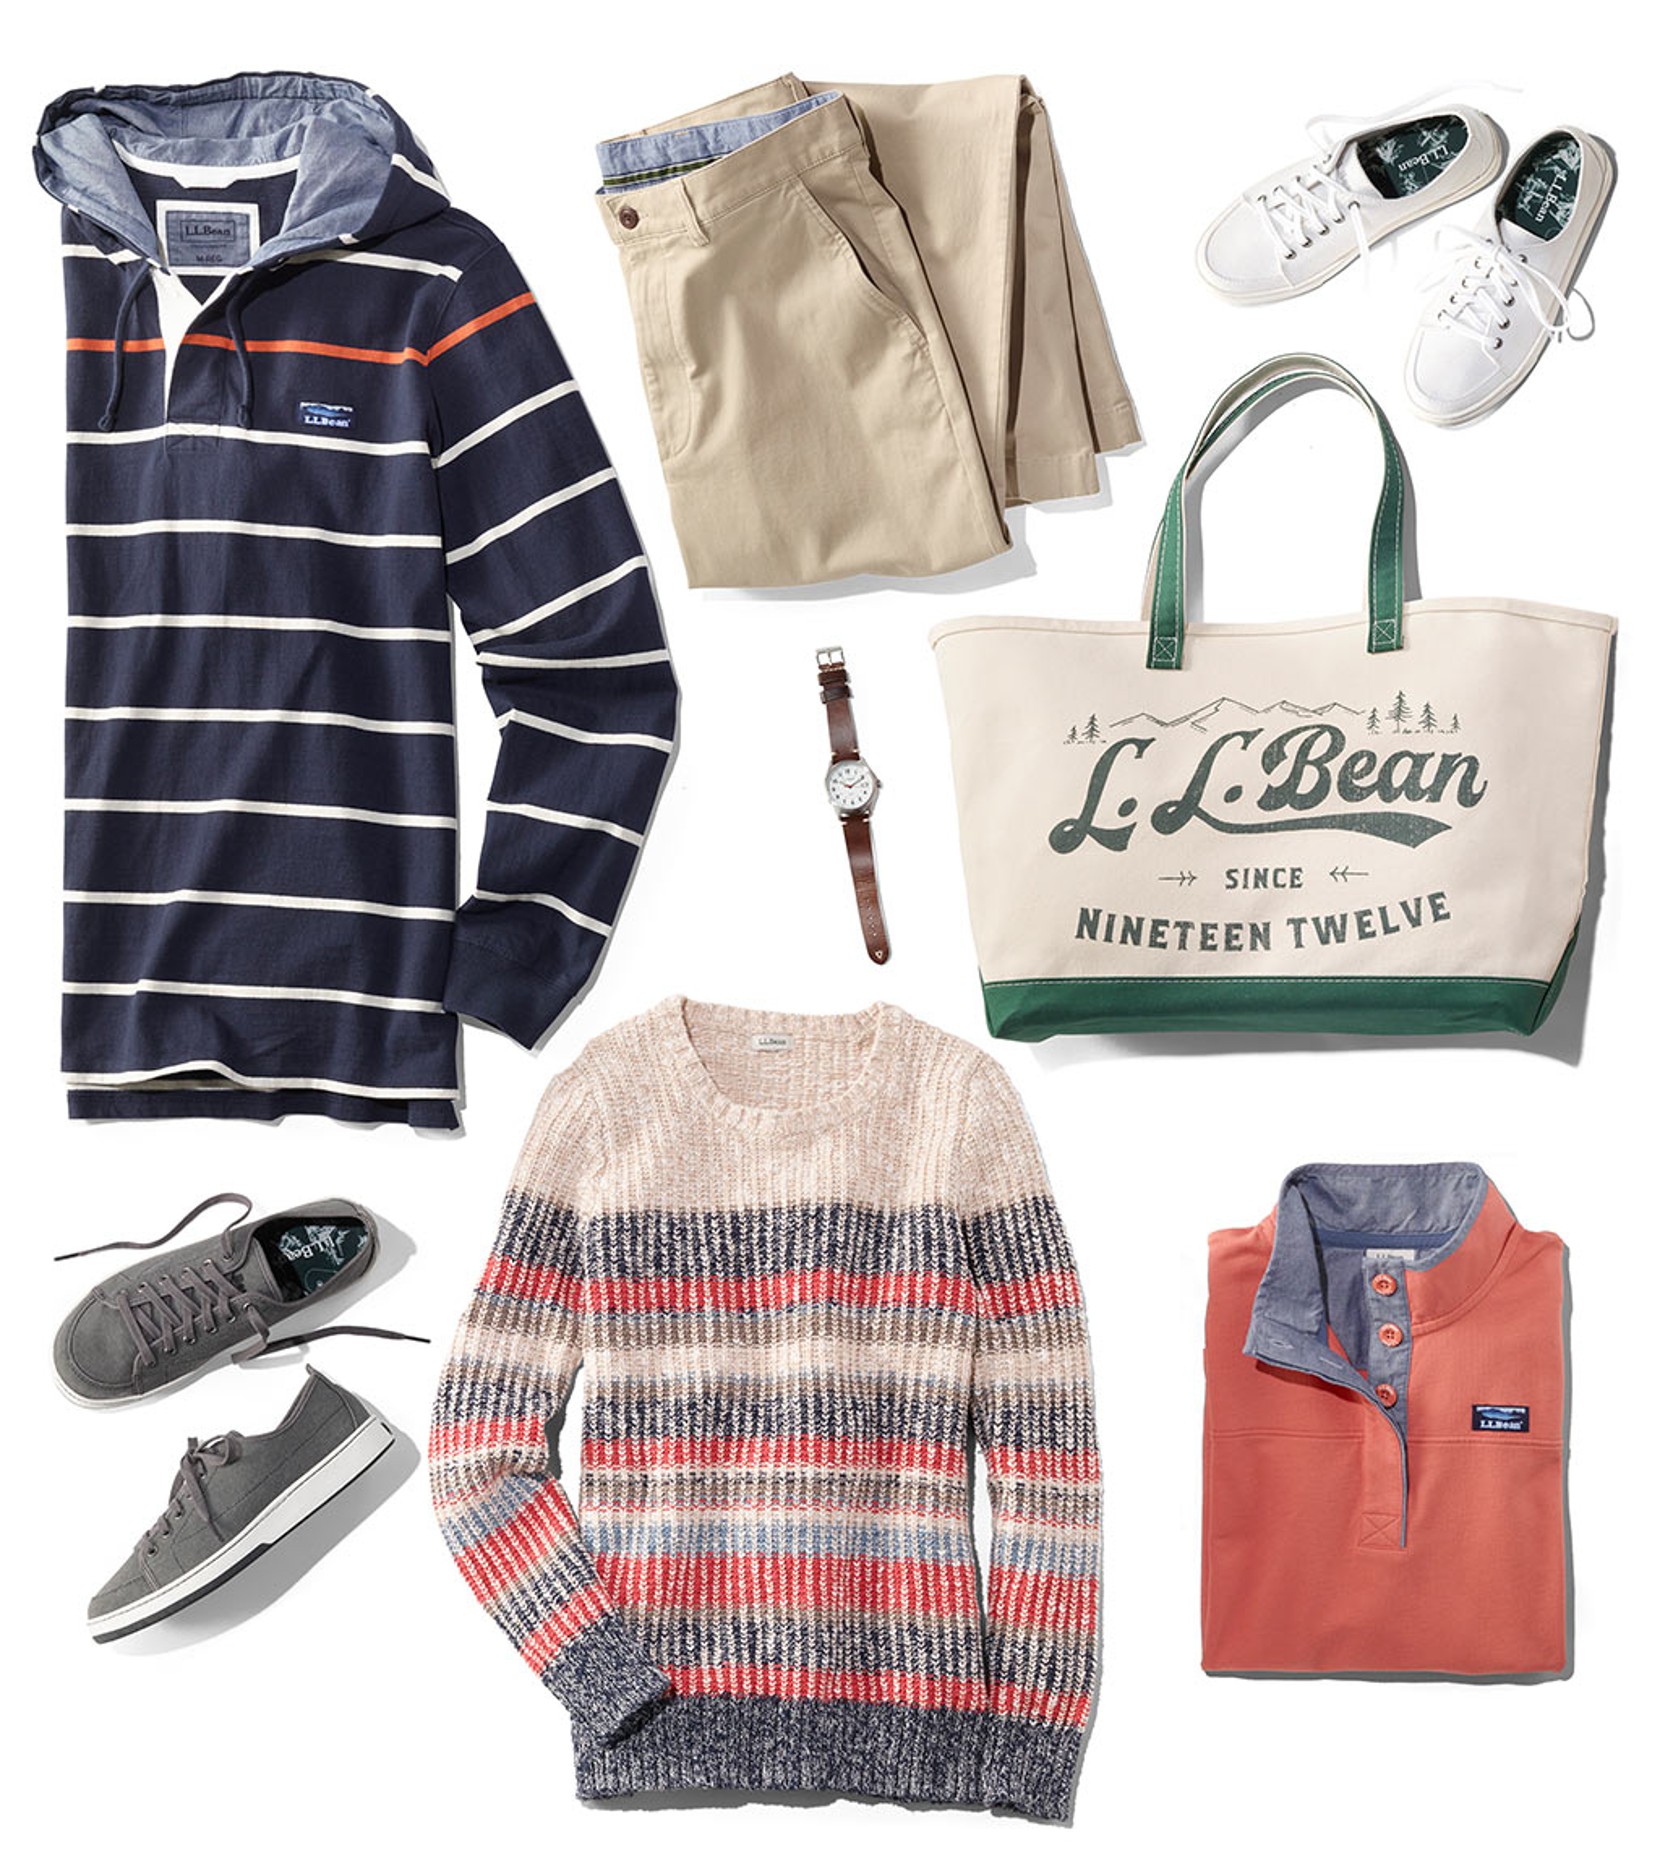 An assortment of L.L.Bean spring clothing and accessories.